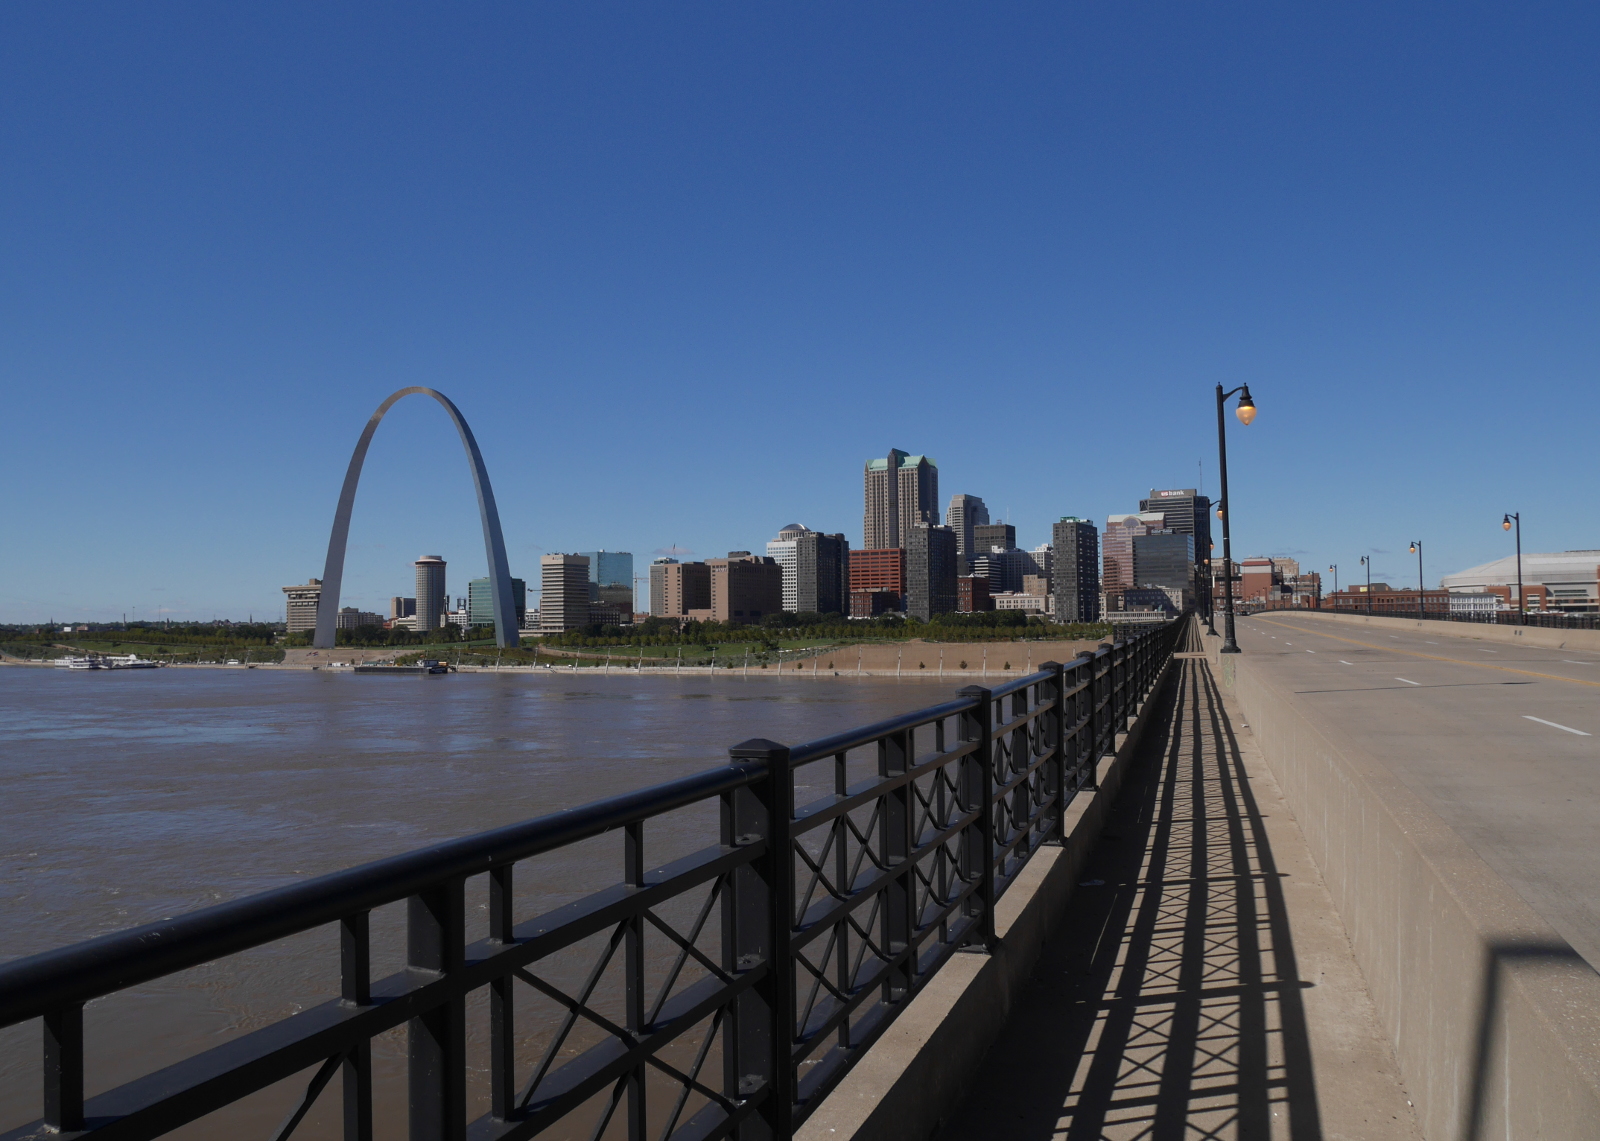 View from the eastern end of the bridge back toward downtown St. Louis.